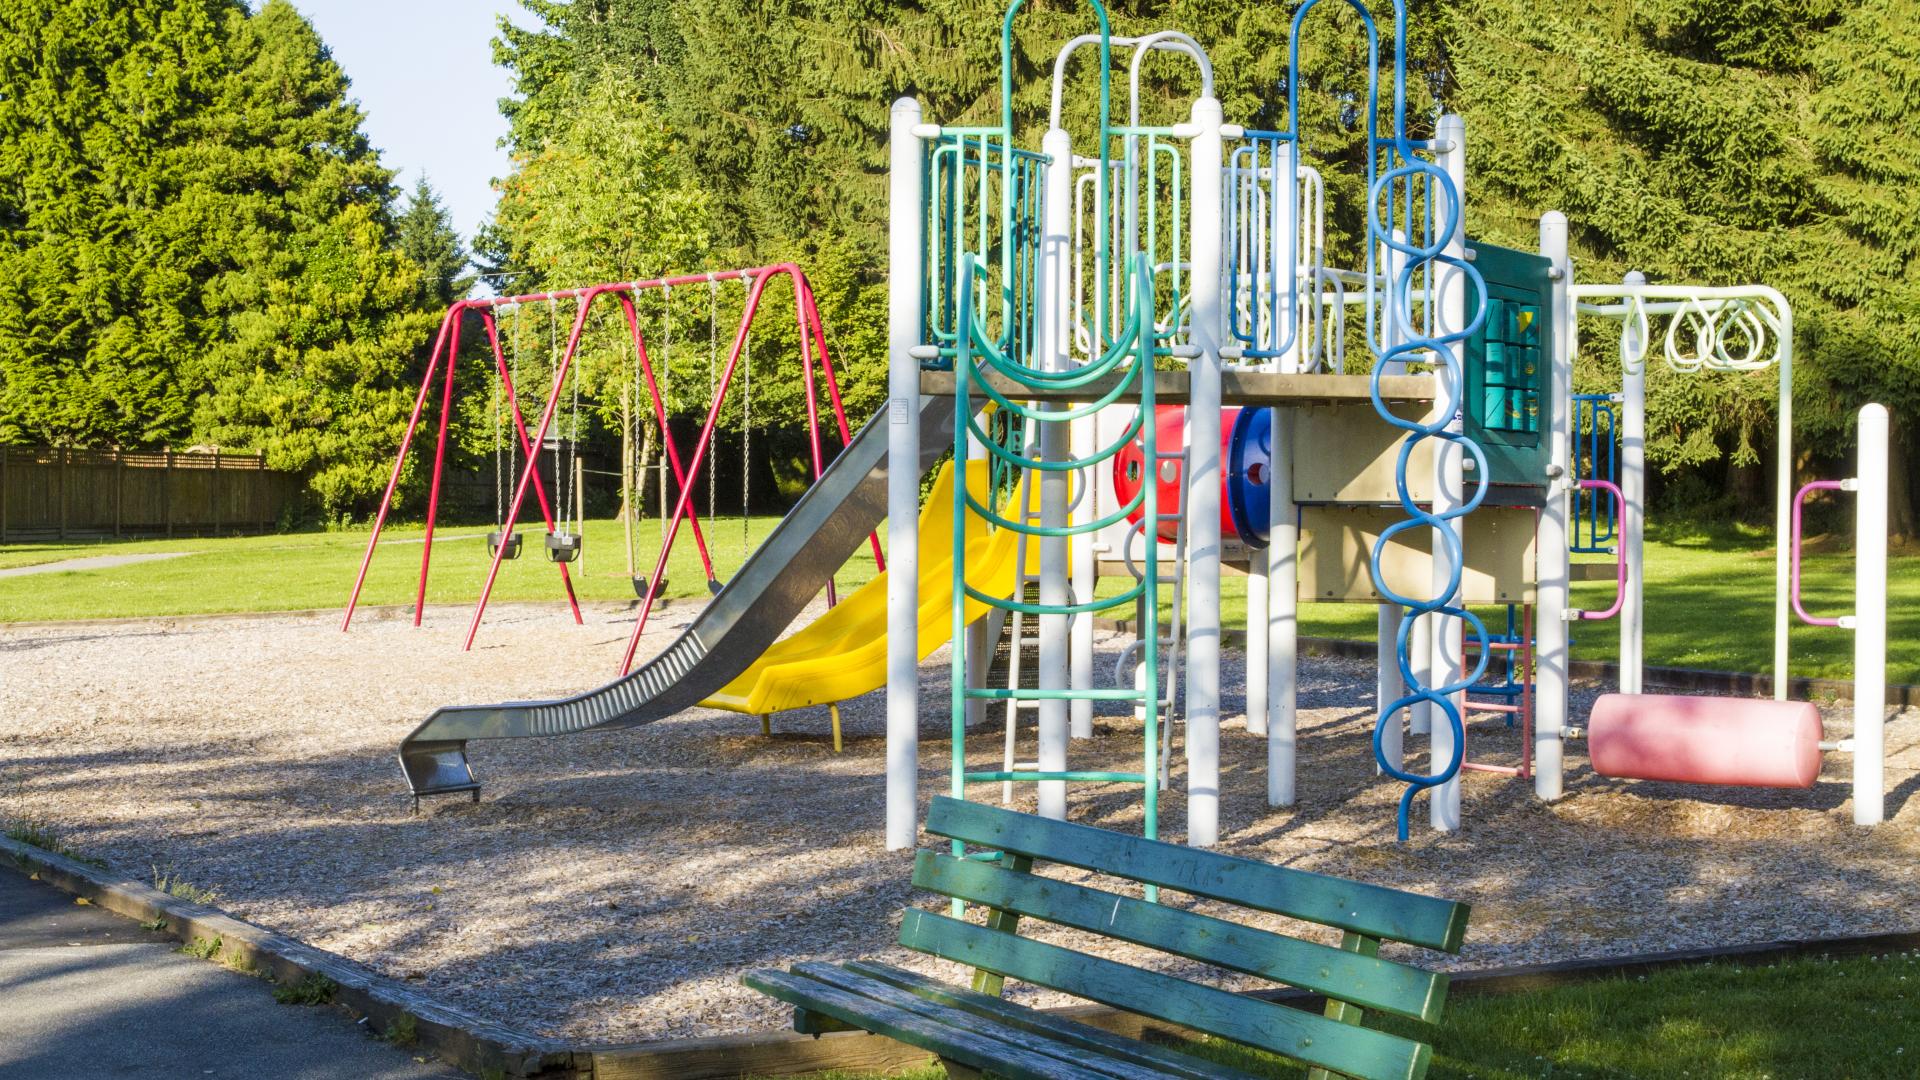 A brightly coloured playground behind a small bench and in front of a swing set.